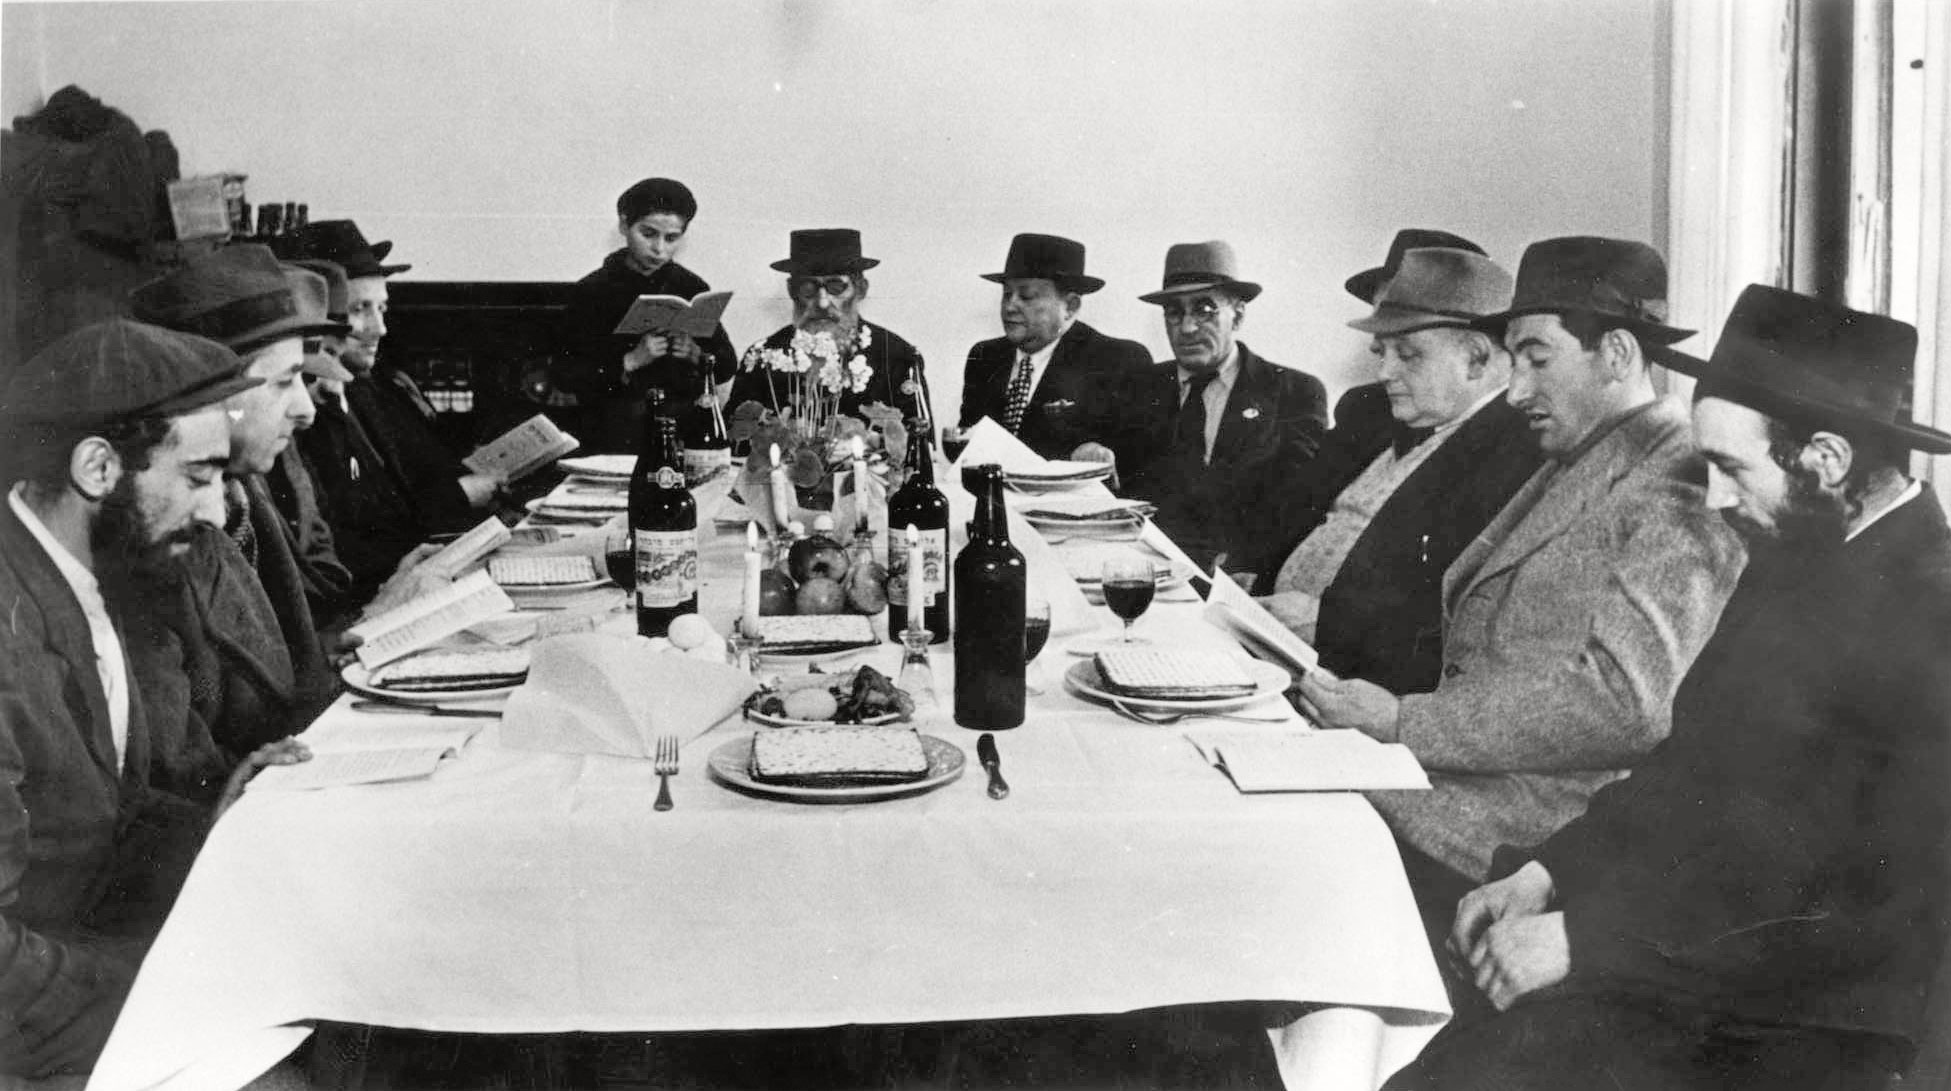 A Passover Seder in a DP camp, Munich, Germany, April 1949